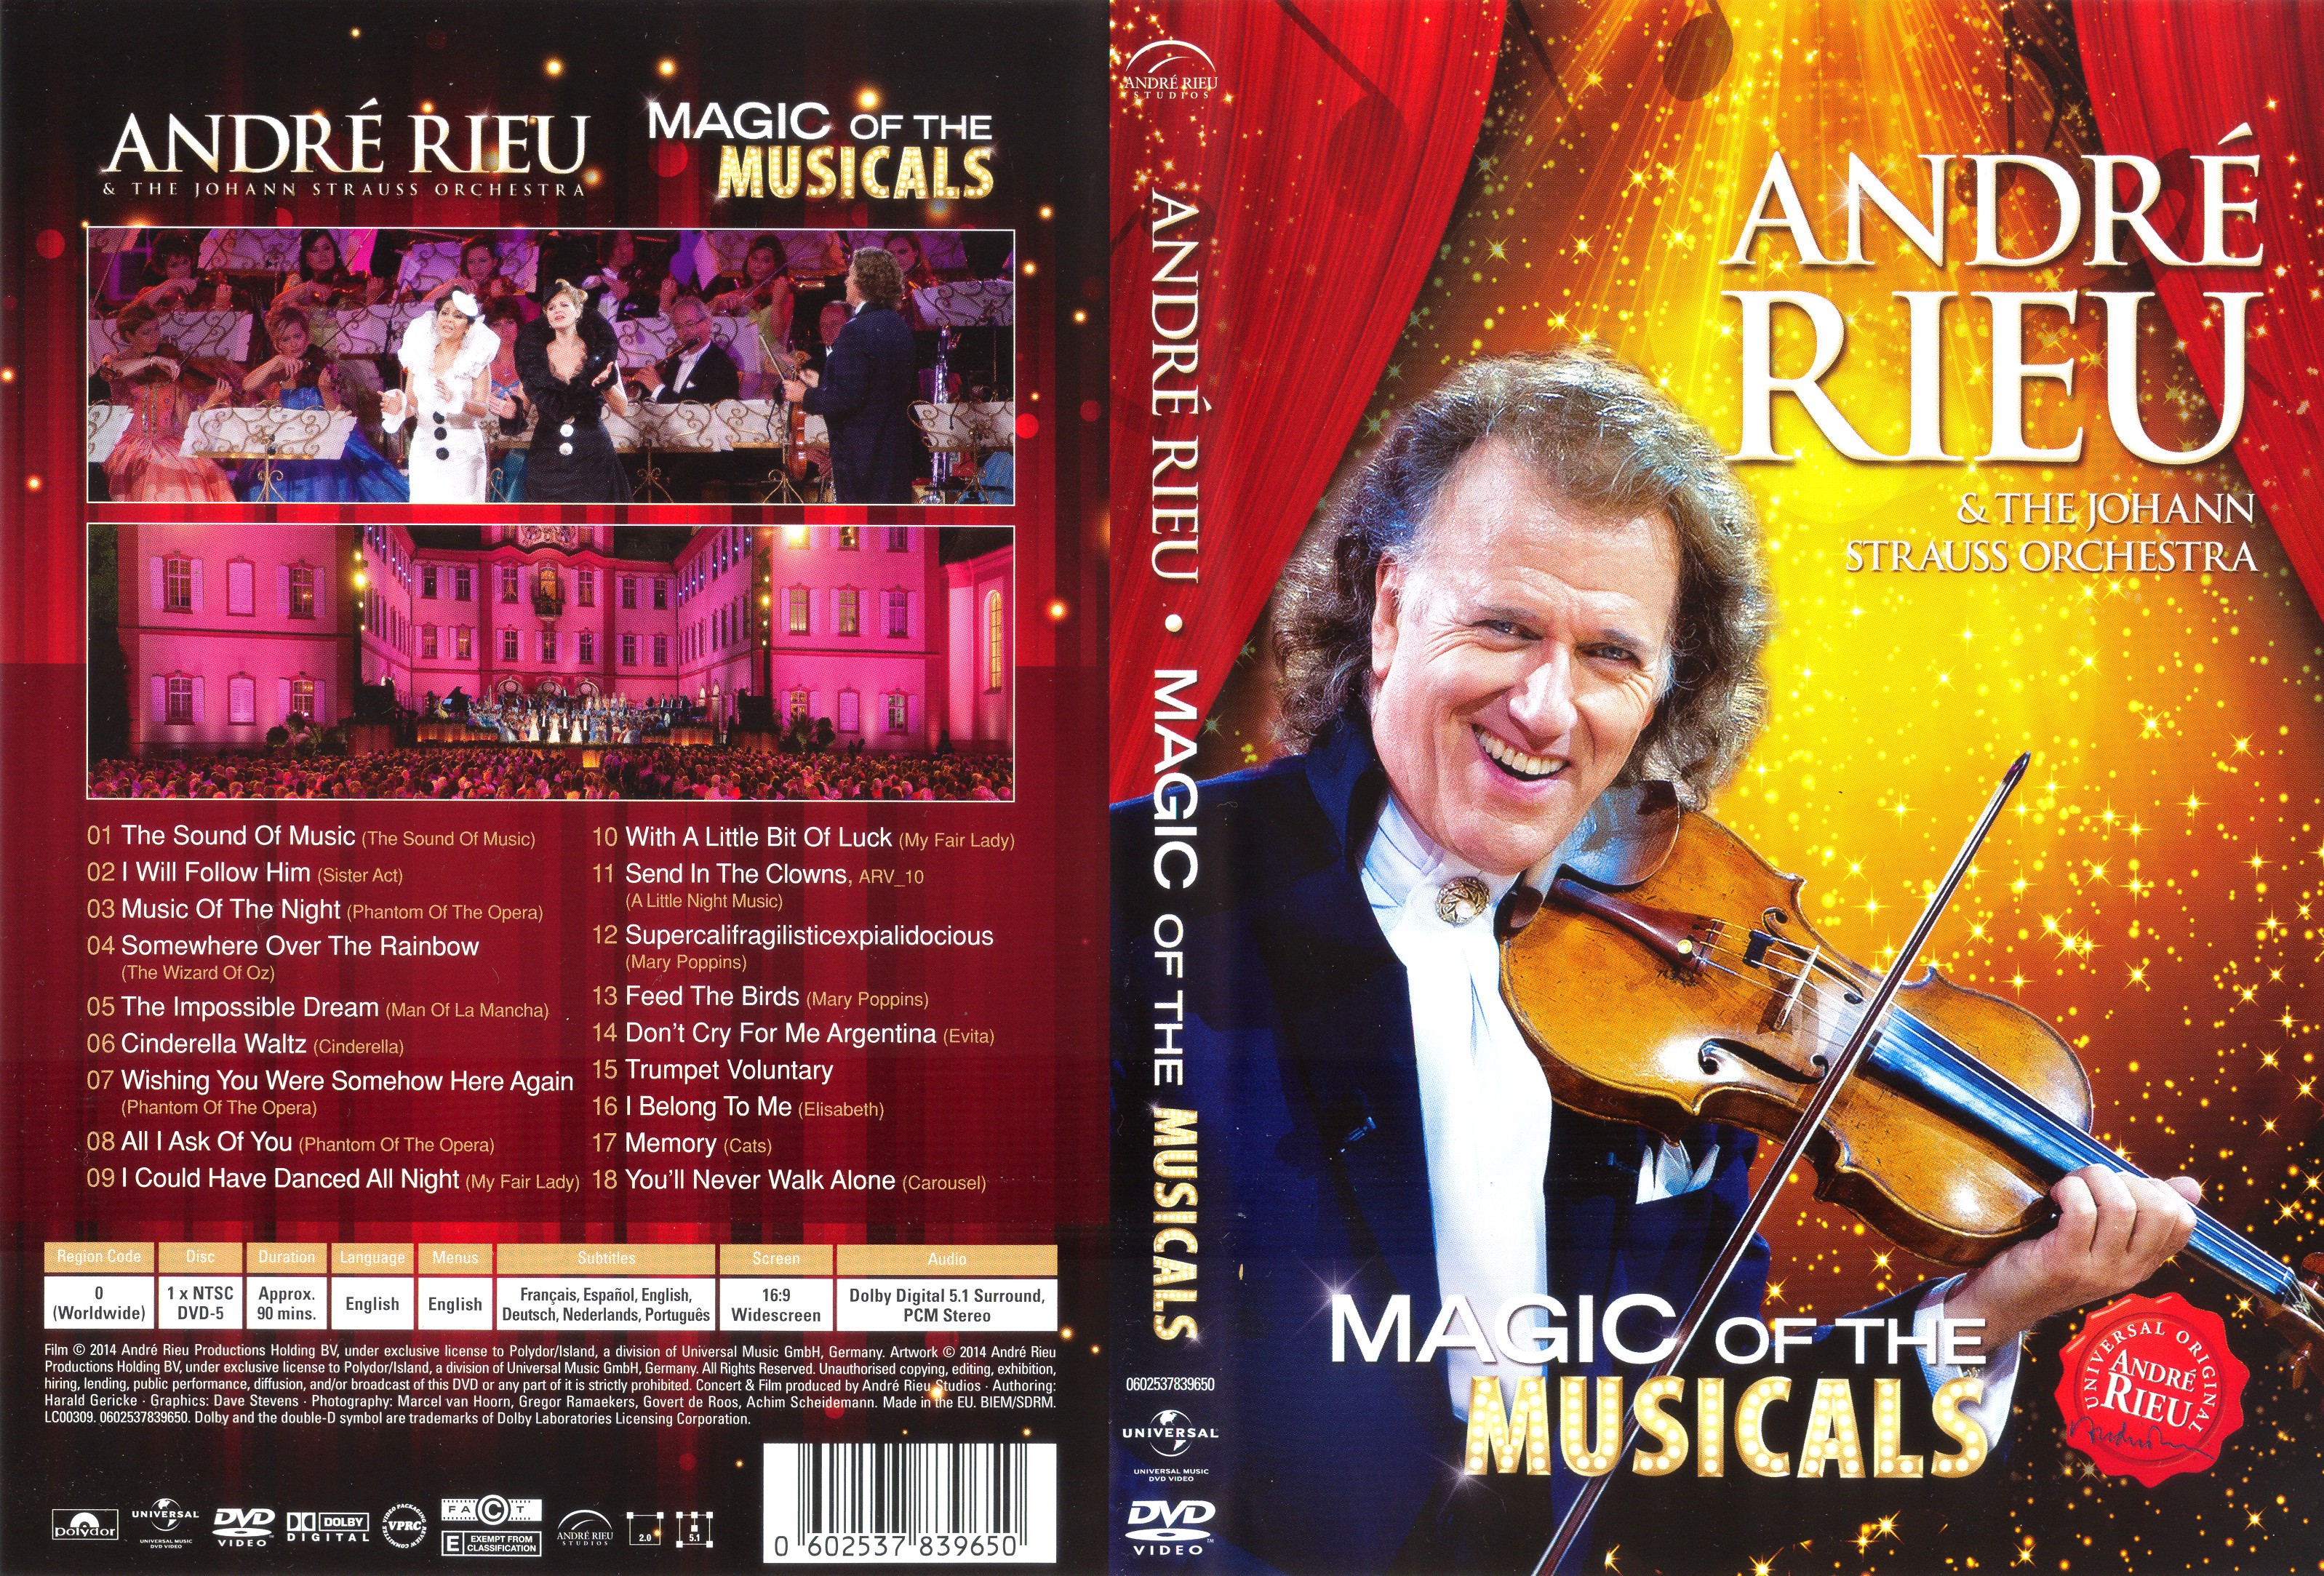 Jaquette DVD Andre Rieu Magic of the Musicals